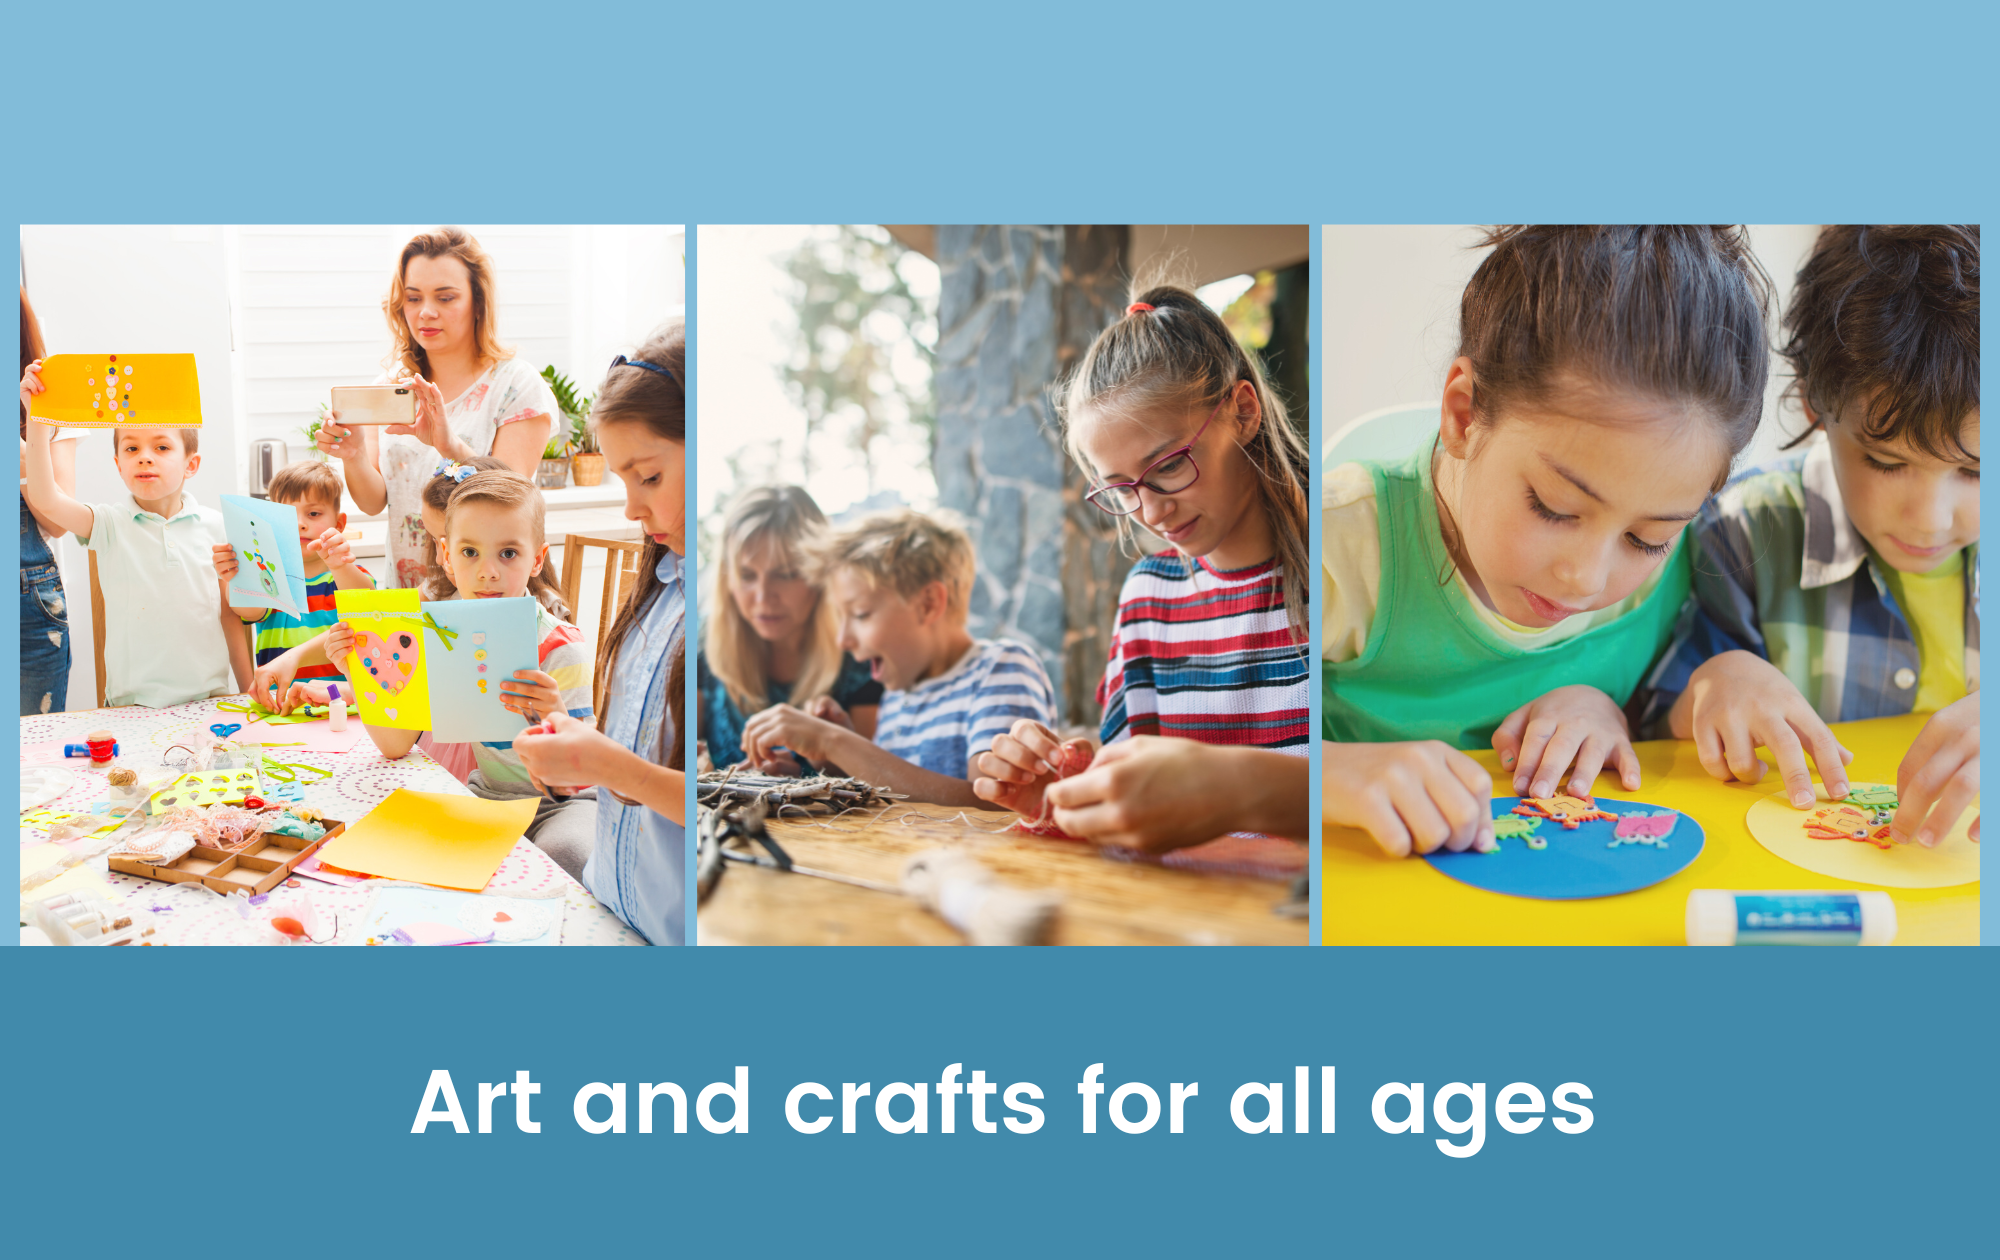 Art and crafts for all ages